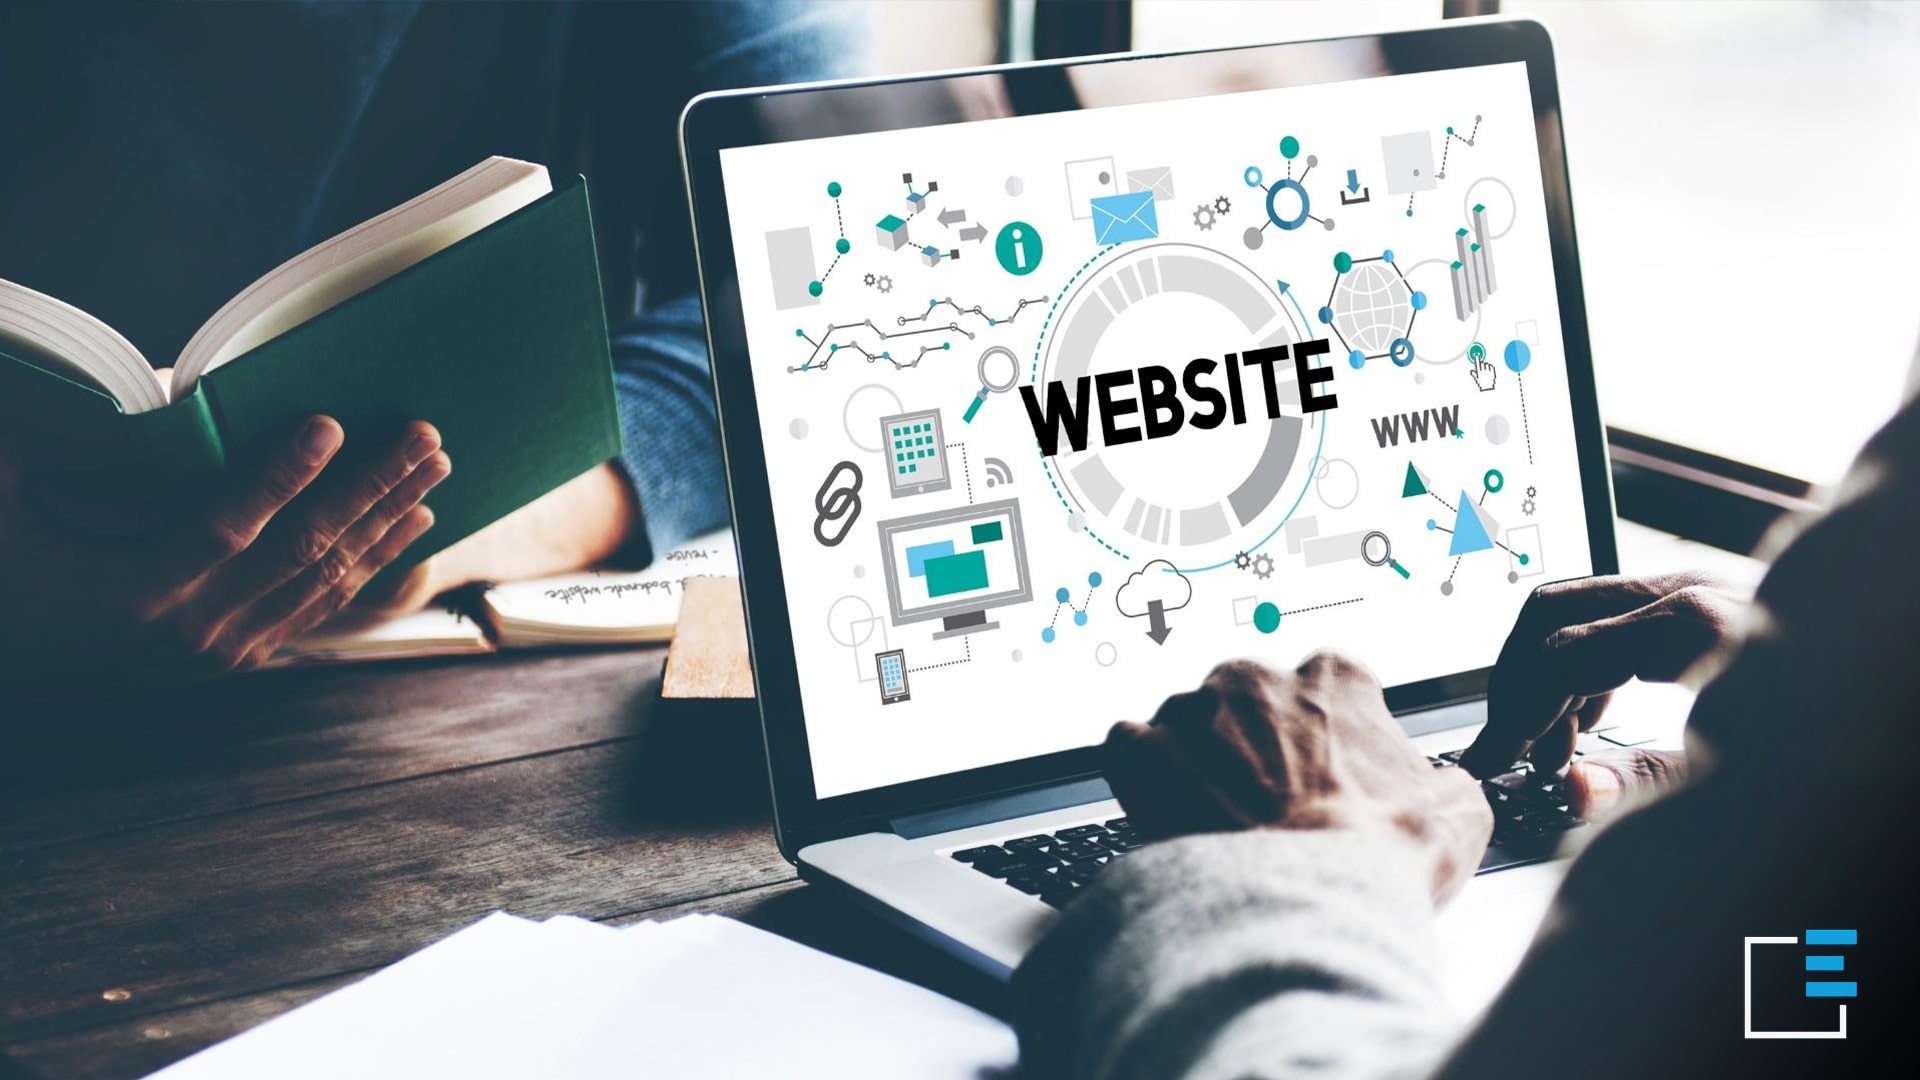 How to create a professional website that converts